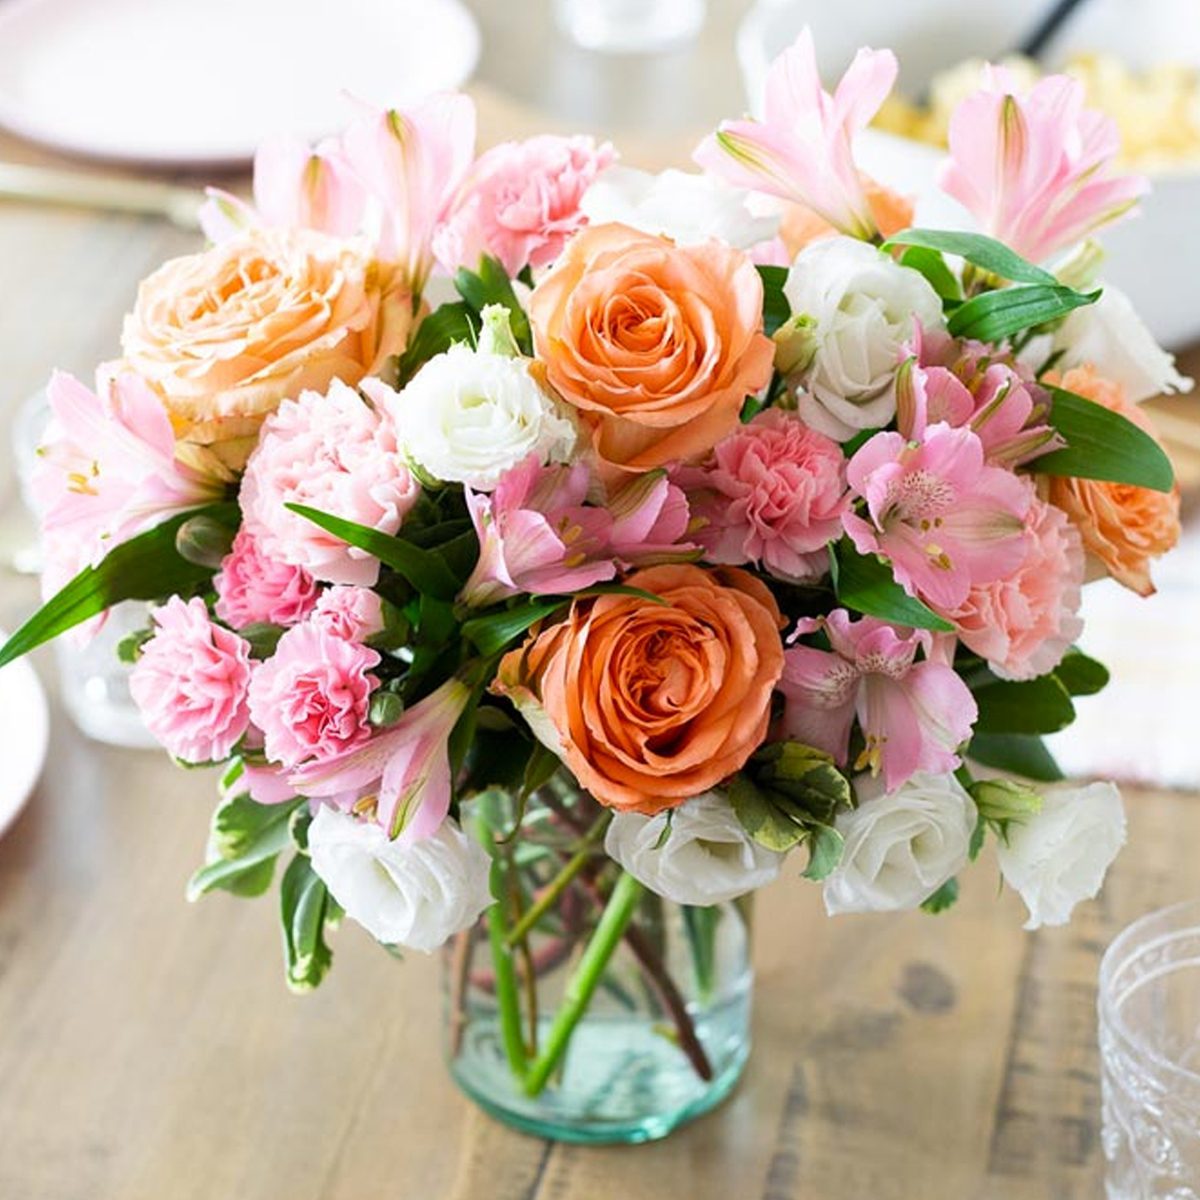 Pretty Easter Flowers We’re Ordering This Spring | Birds and Blooms